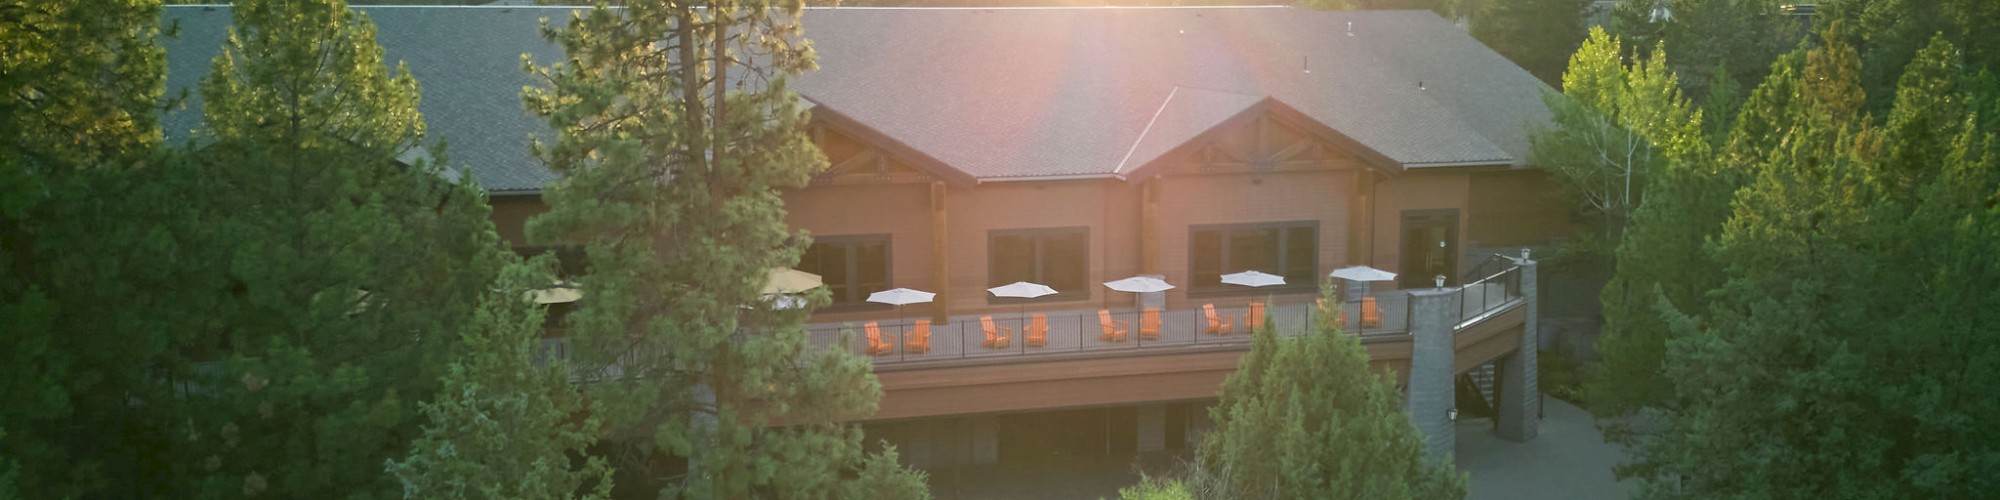 A large wooden building is nestled among tall trees with a sunlit backdrop and a patio featuring tables and umbrellas.